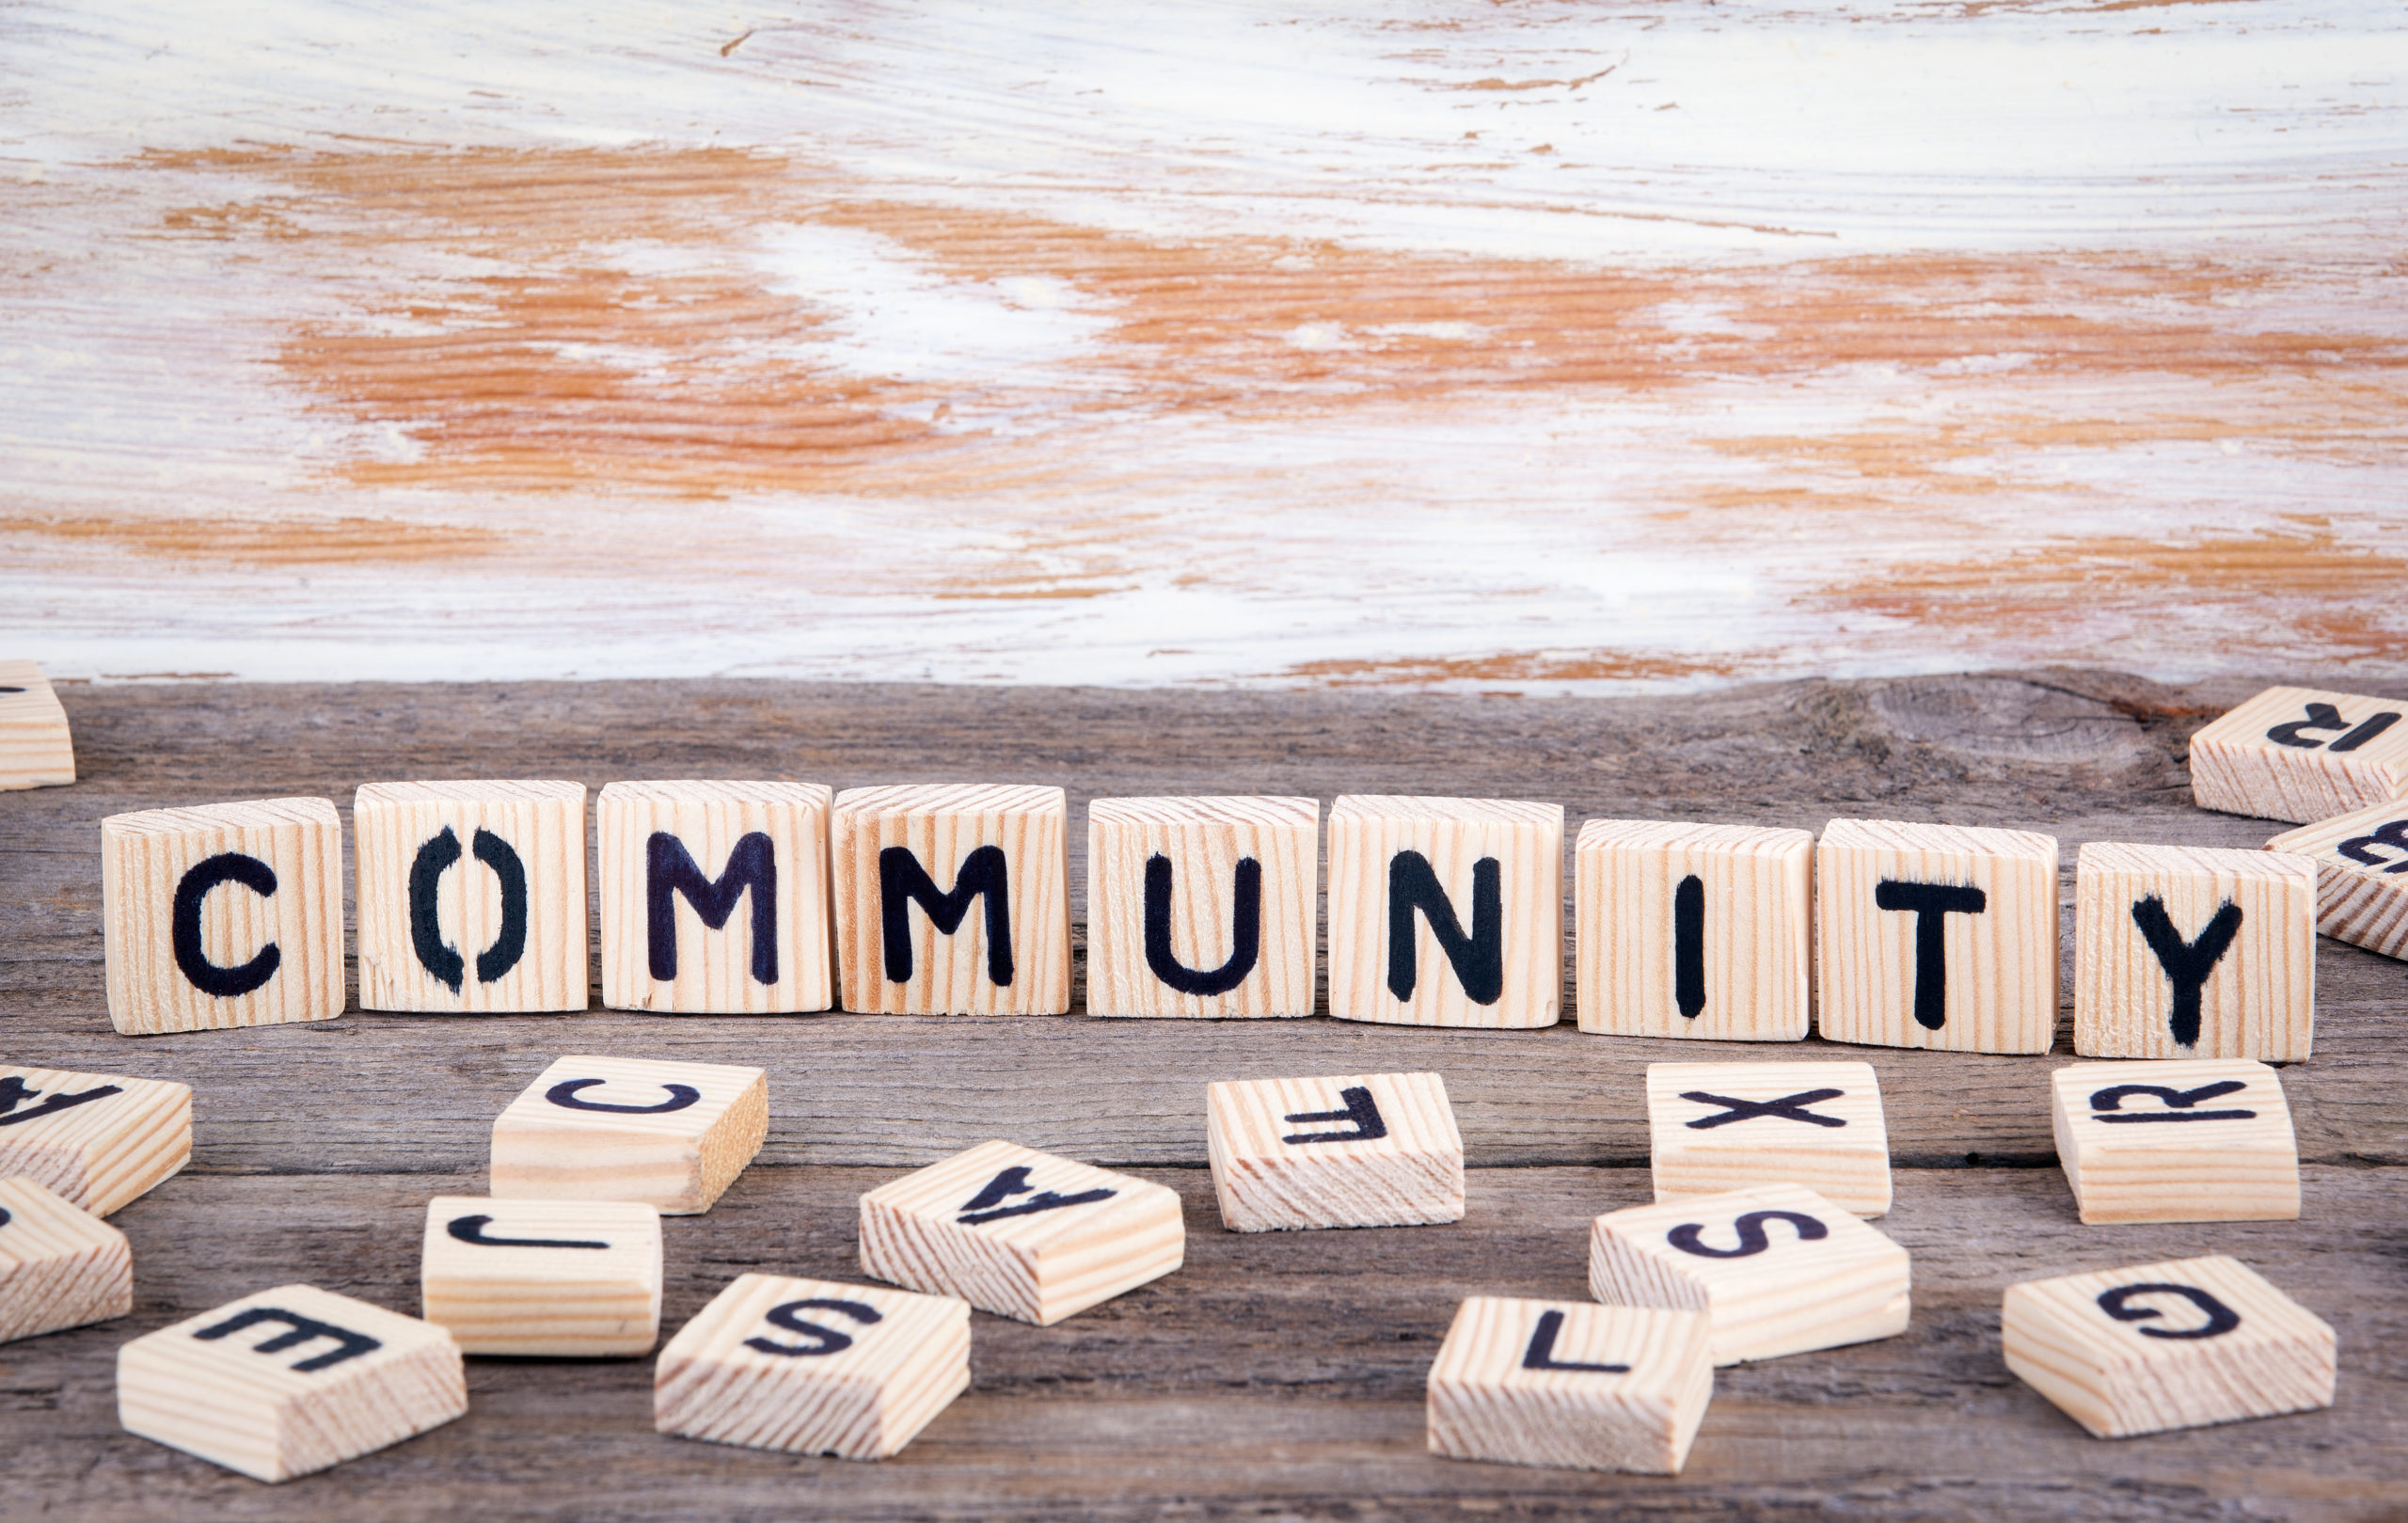 The role of Advice & Guidance in the community - Consultant Connect